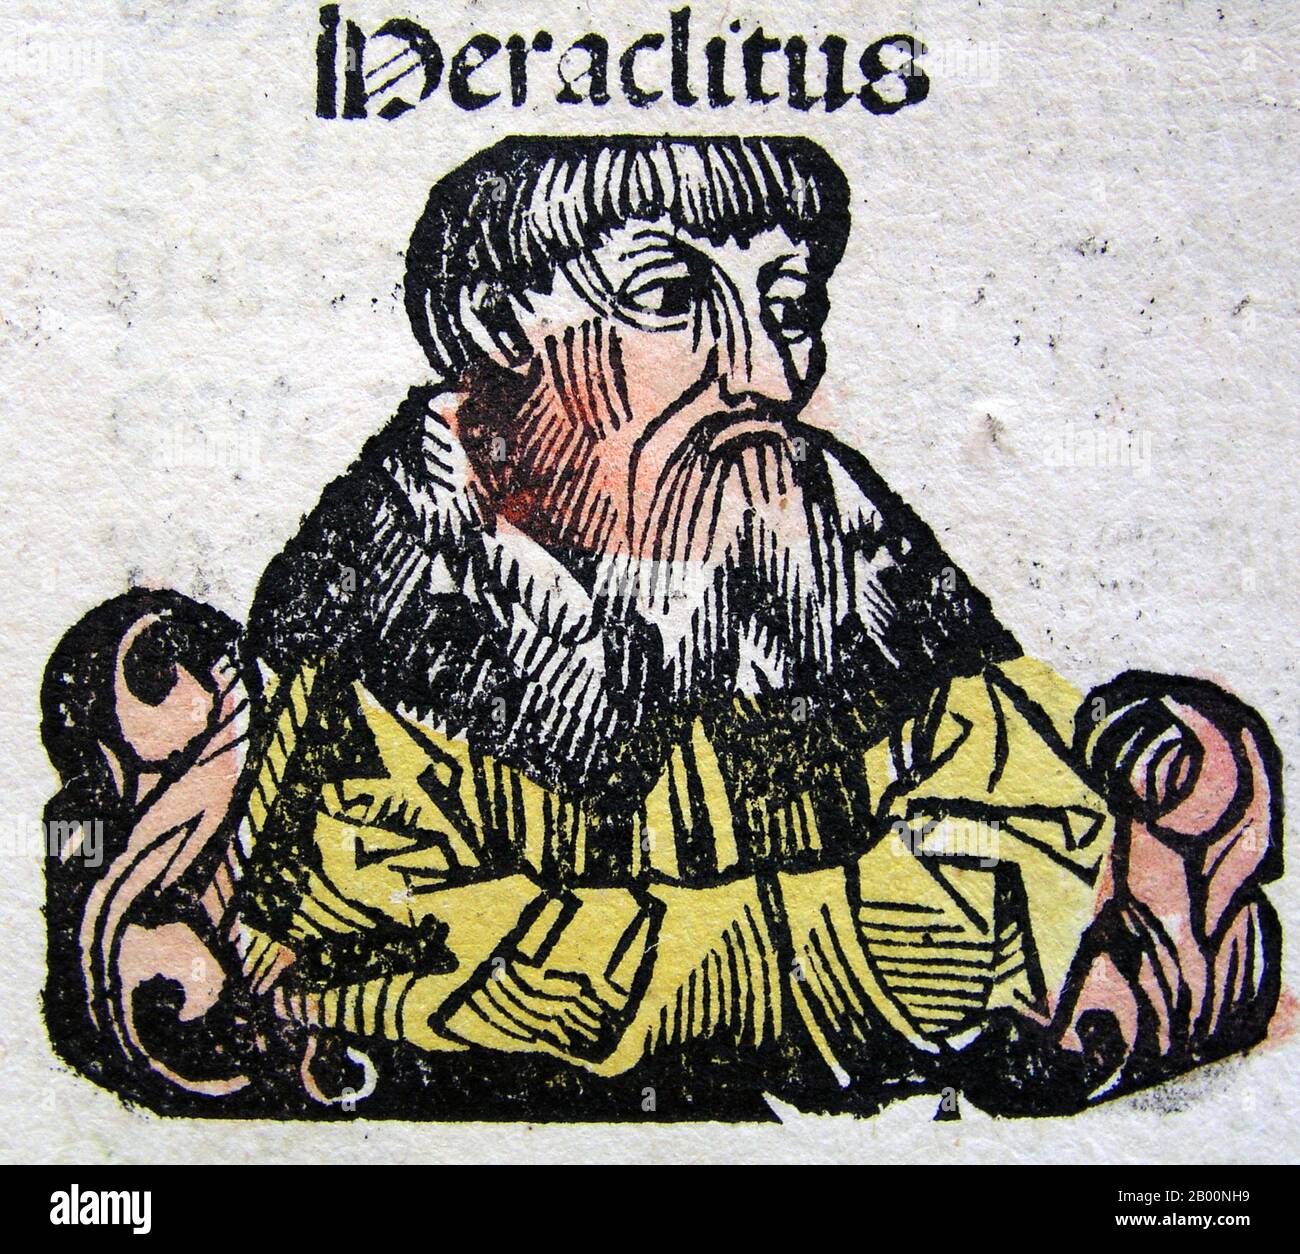 Germany: 'Heraclitus'. The Nuremberg Chronicle, by Hartmann Schedel (1440-1514), 1493.  The Nuremberg Chronicle is an illustrated world history. Its structure follows the story of human history as related in the Bible, including the histories of a number of important Western cities. Written in Latin by Hartmann Schedel, with a version in German translation by Georg Alt, it appeared in 1493. It is one of the best-documented early printed books. It is classified as an incunabulum, a book, pamphlet, or broadside that was printed (not handwritten) before the year 1501 in Europe. Stock Photo